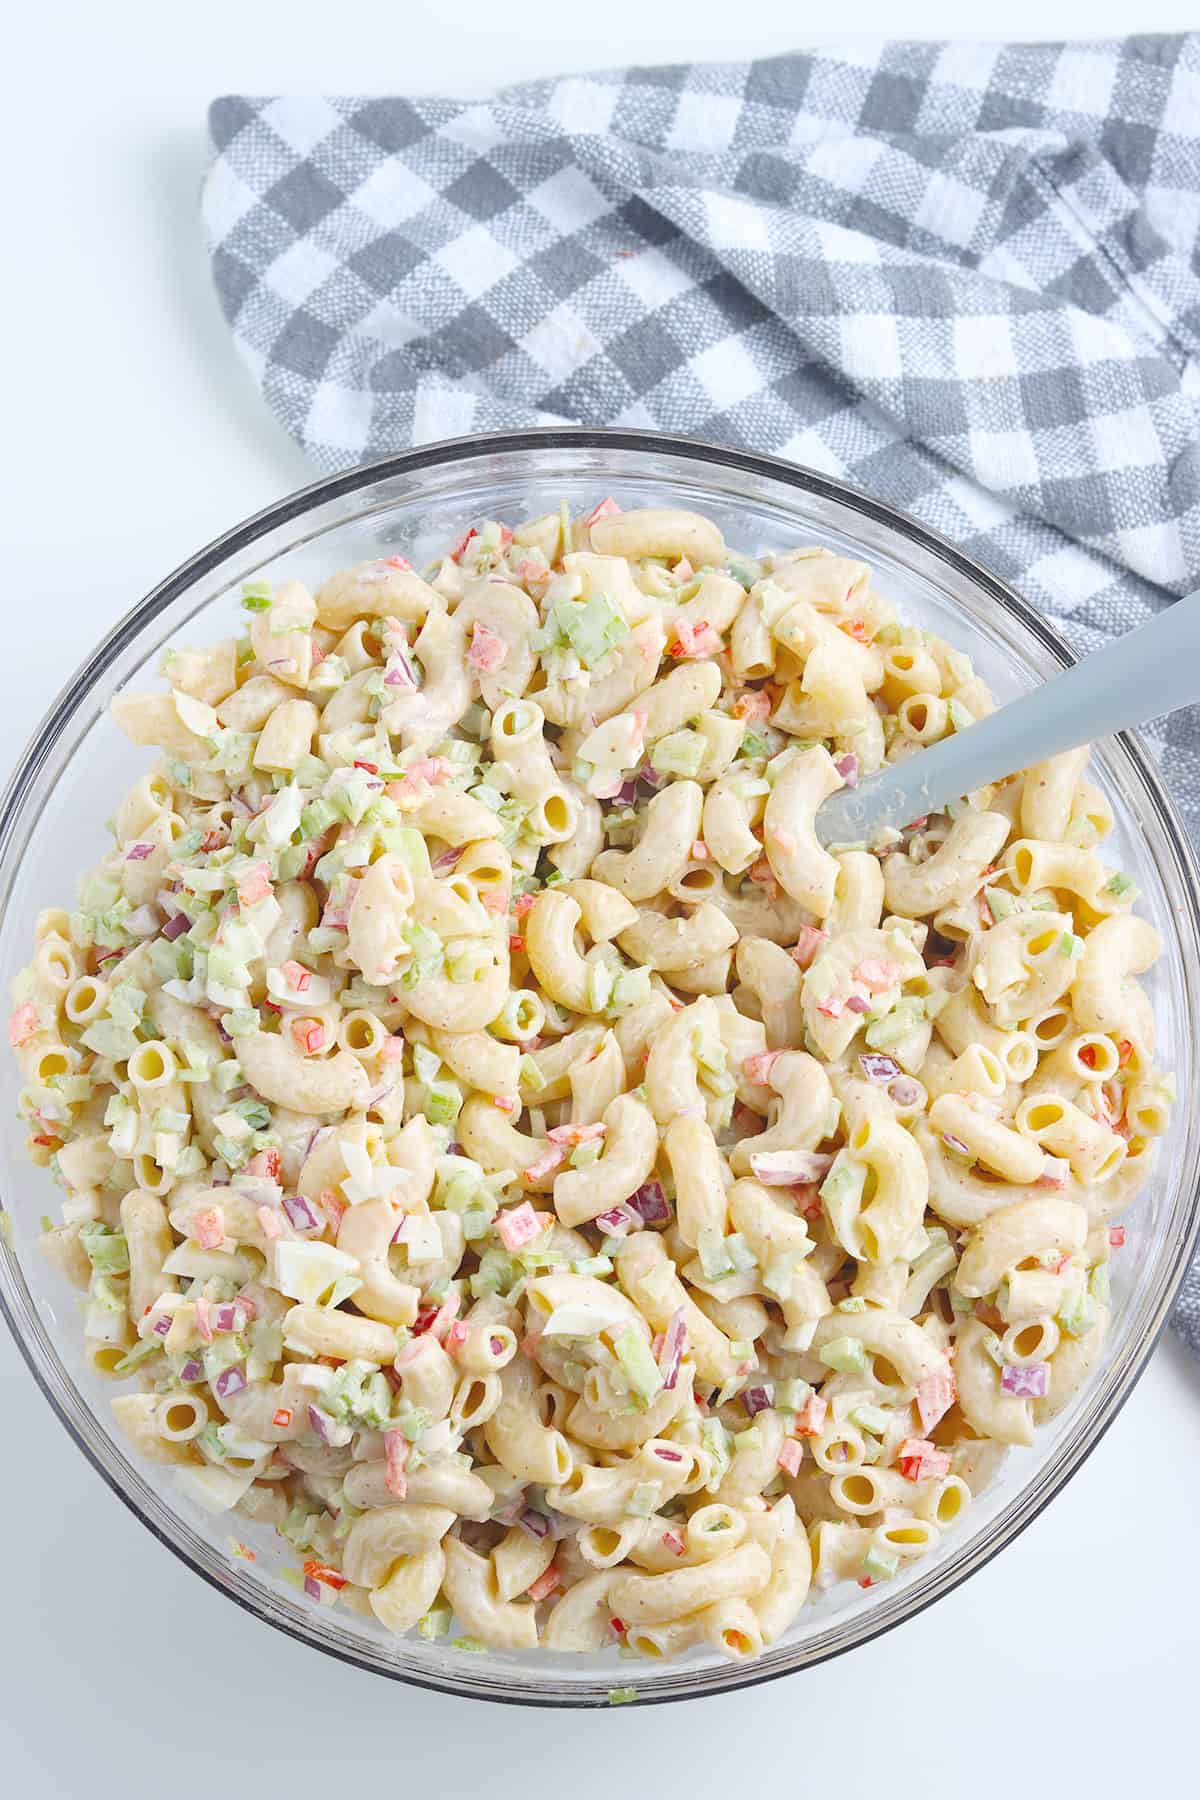 Completed macaroni salad after thoroughly mixing.